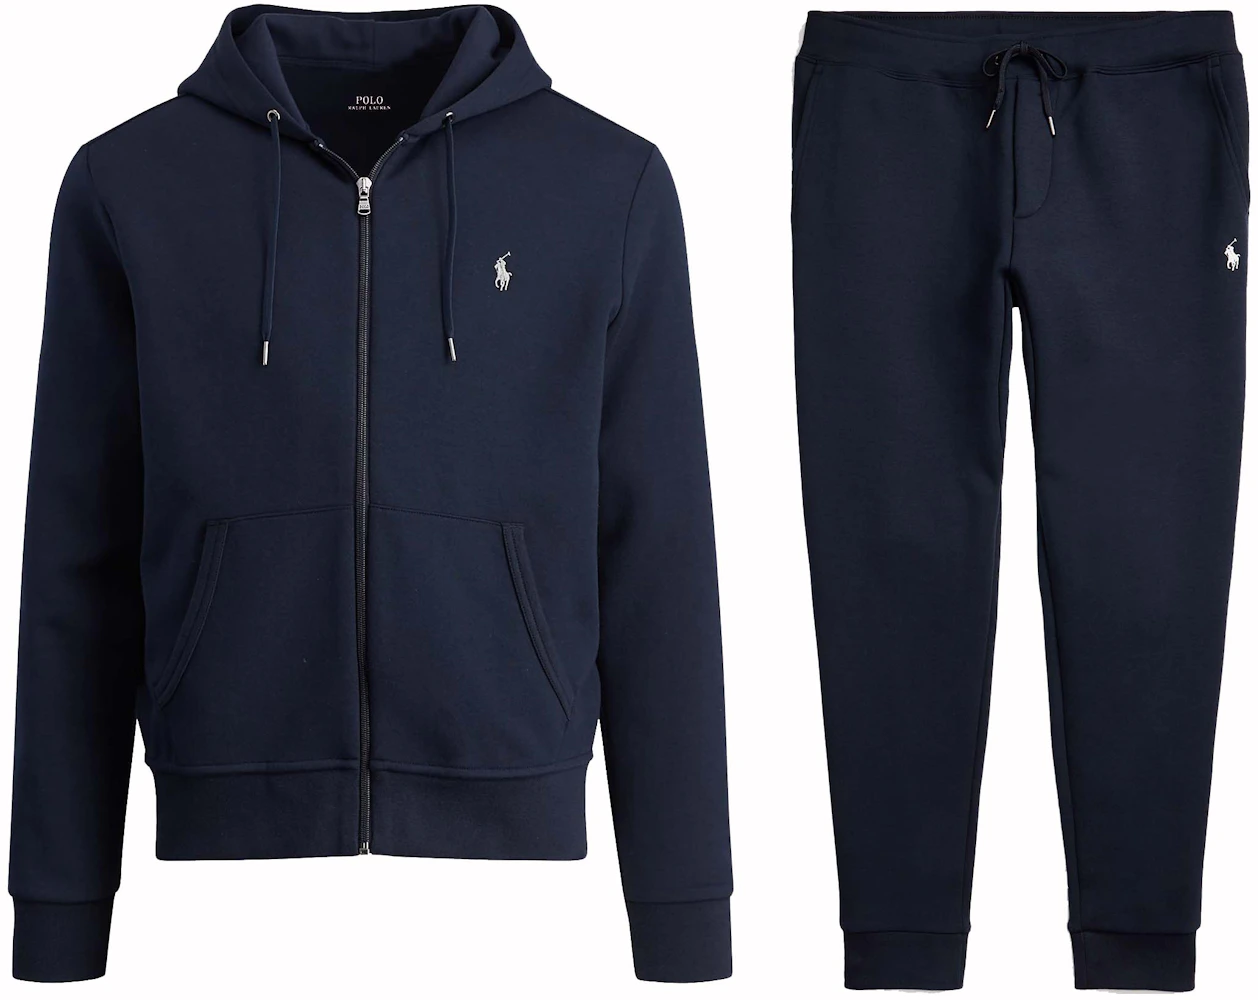 Polo Ralph Lauren Double-Knit Full-Zip Hoodie and Double-Knit